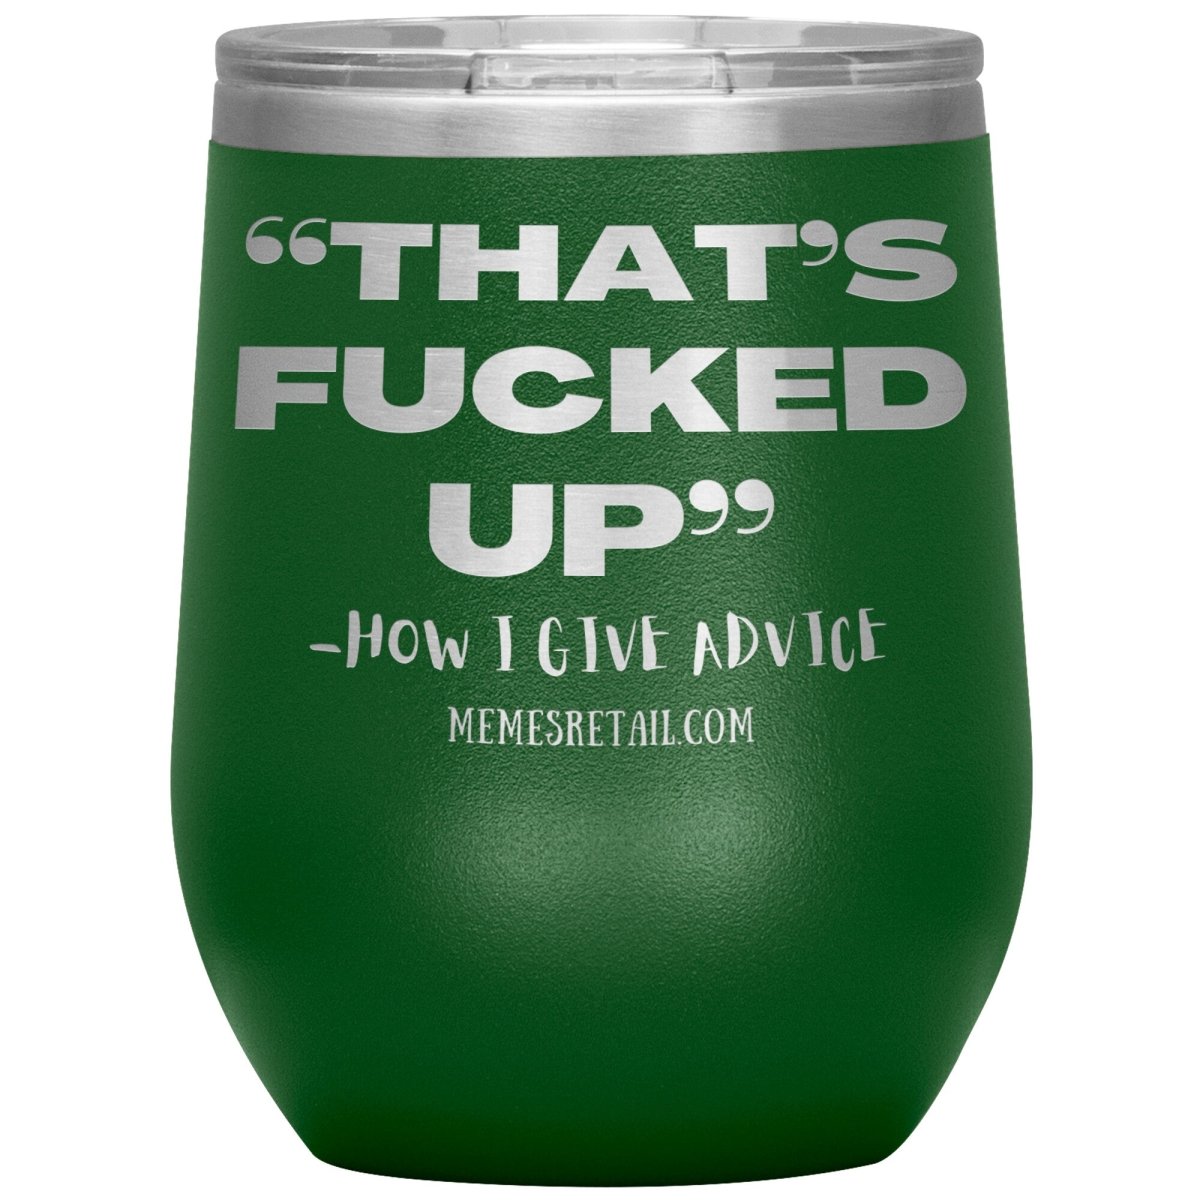 “That’s Fucked Up” -how I give advice Tumblers, 12oz Wine Insulated Tumbler / Green - MemesRetail.com